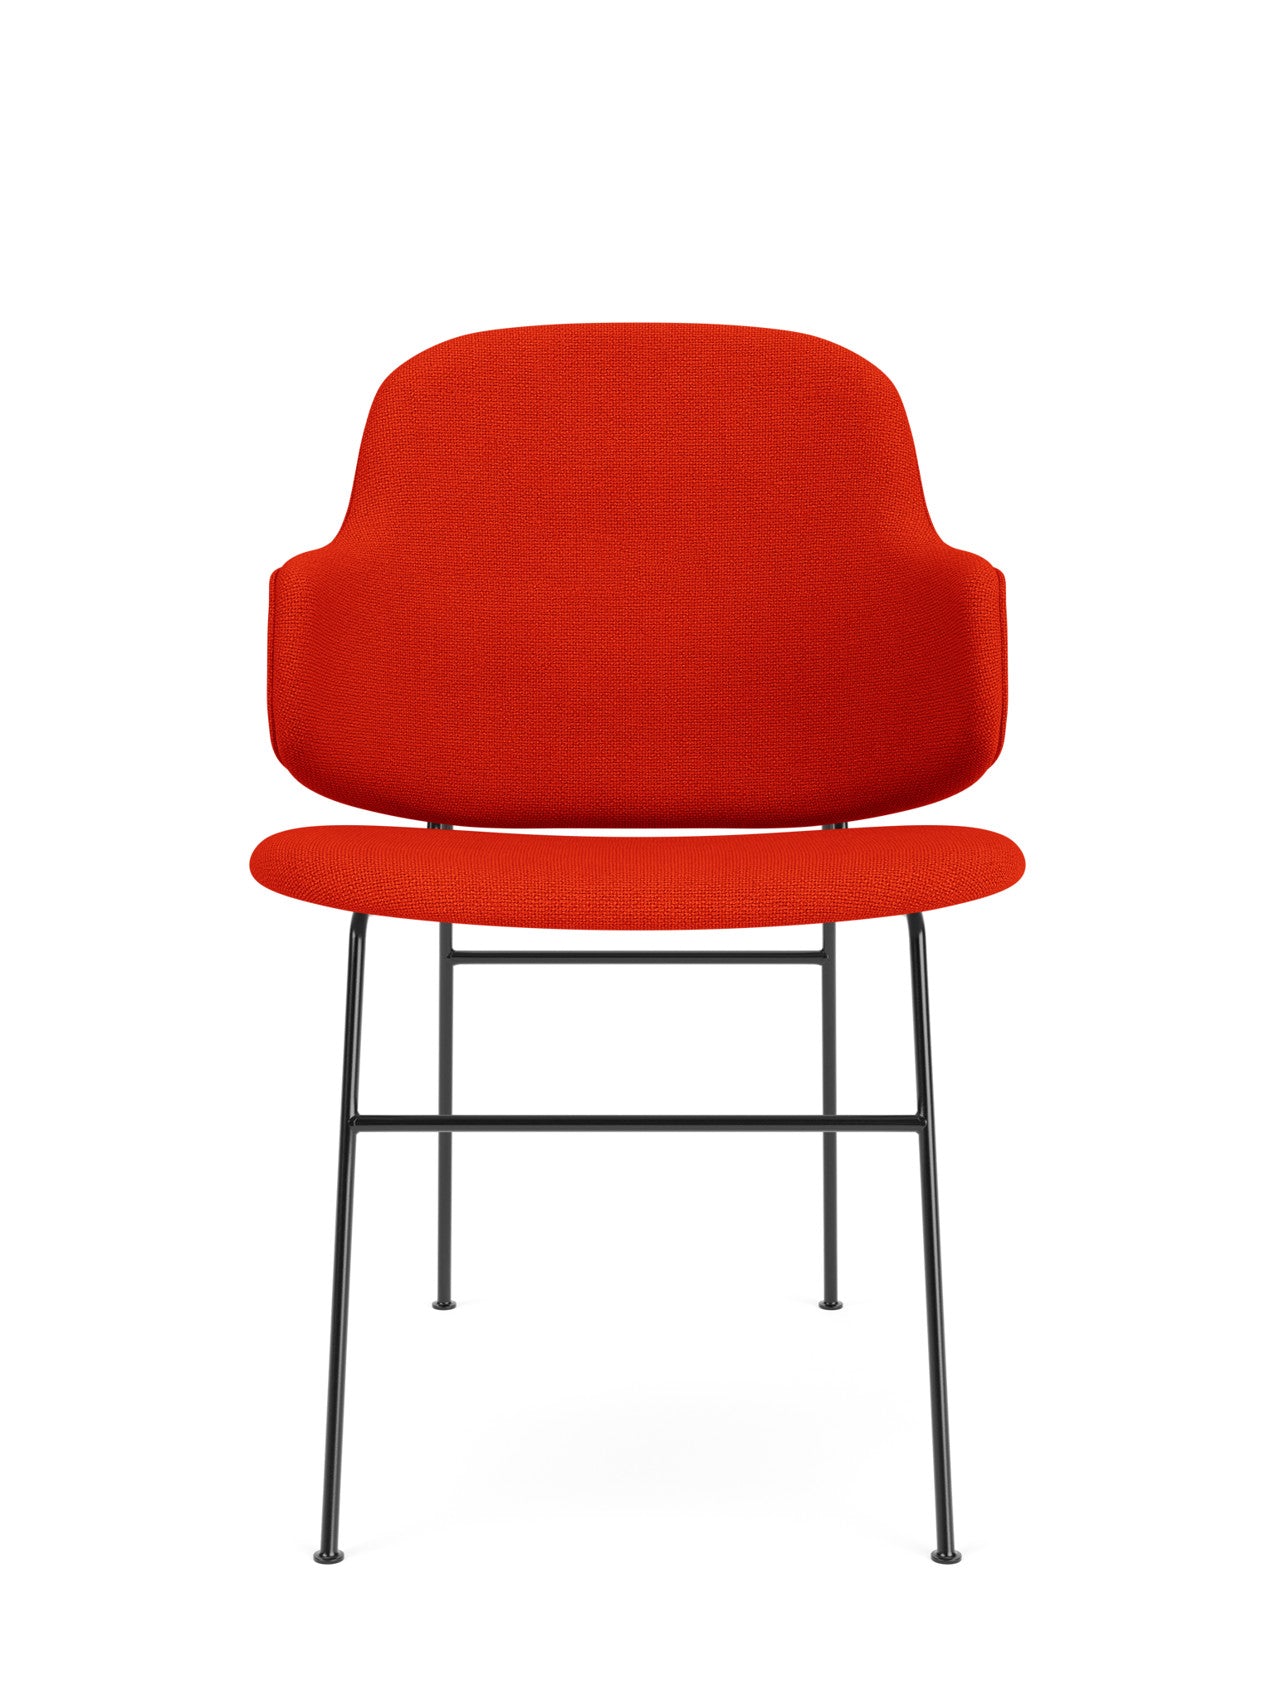 The Penguin Dining Chair, Upholstered | Designed by Ib Kofod-Larsen